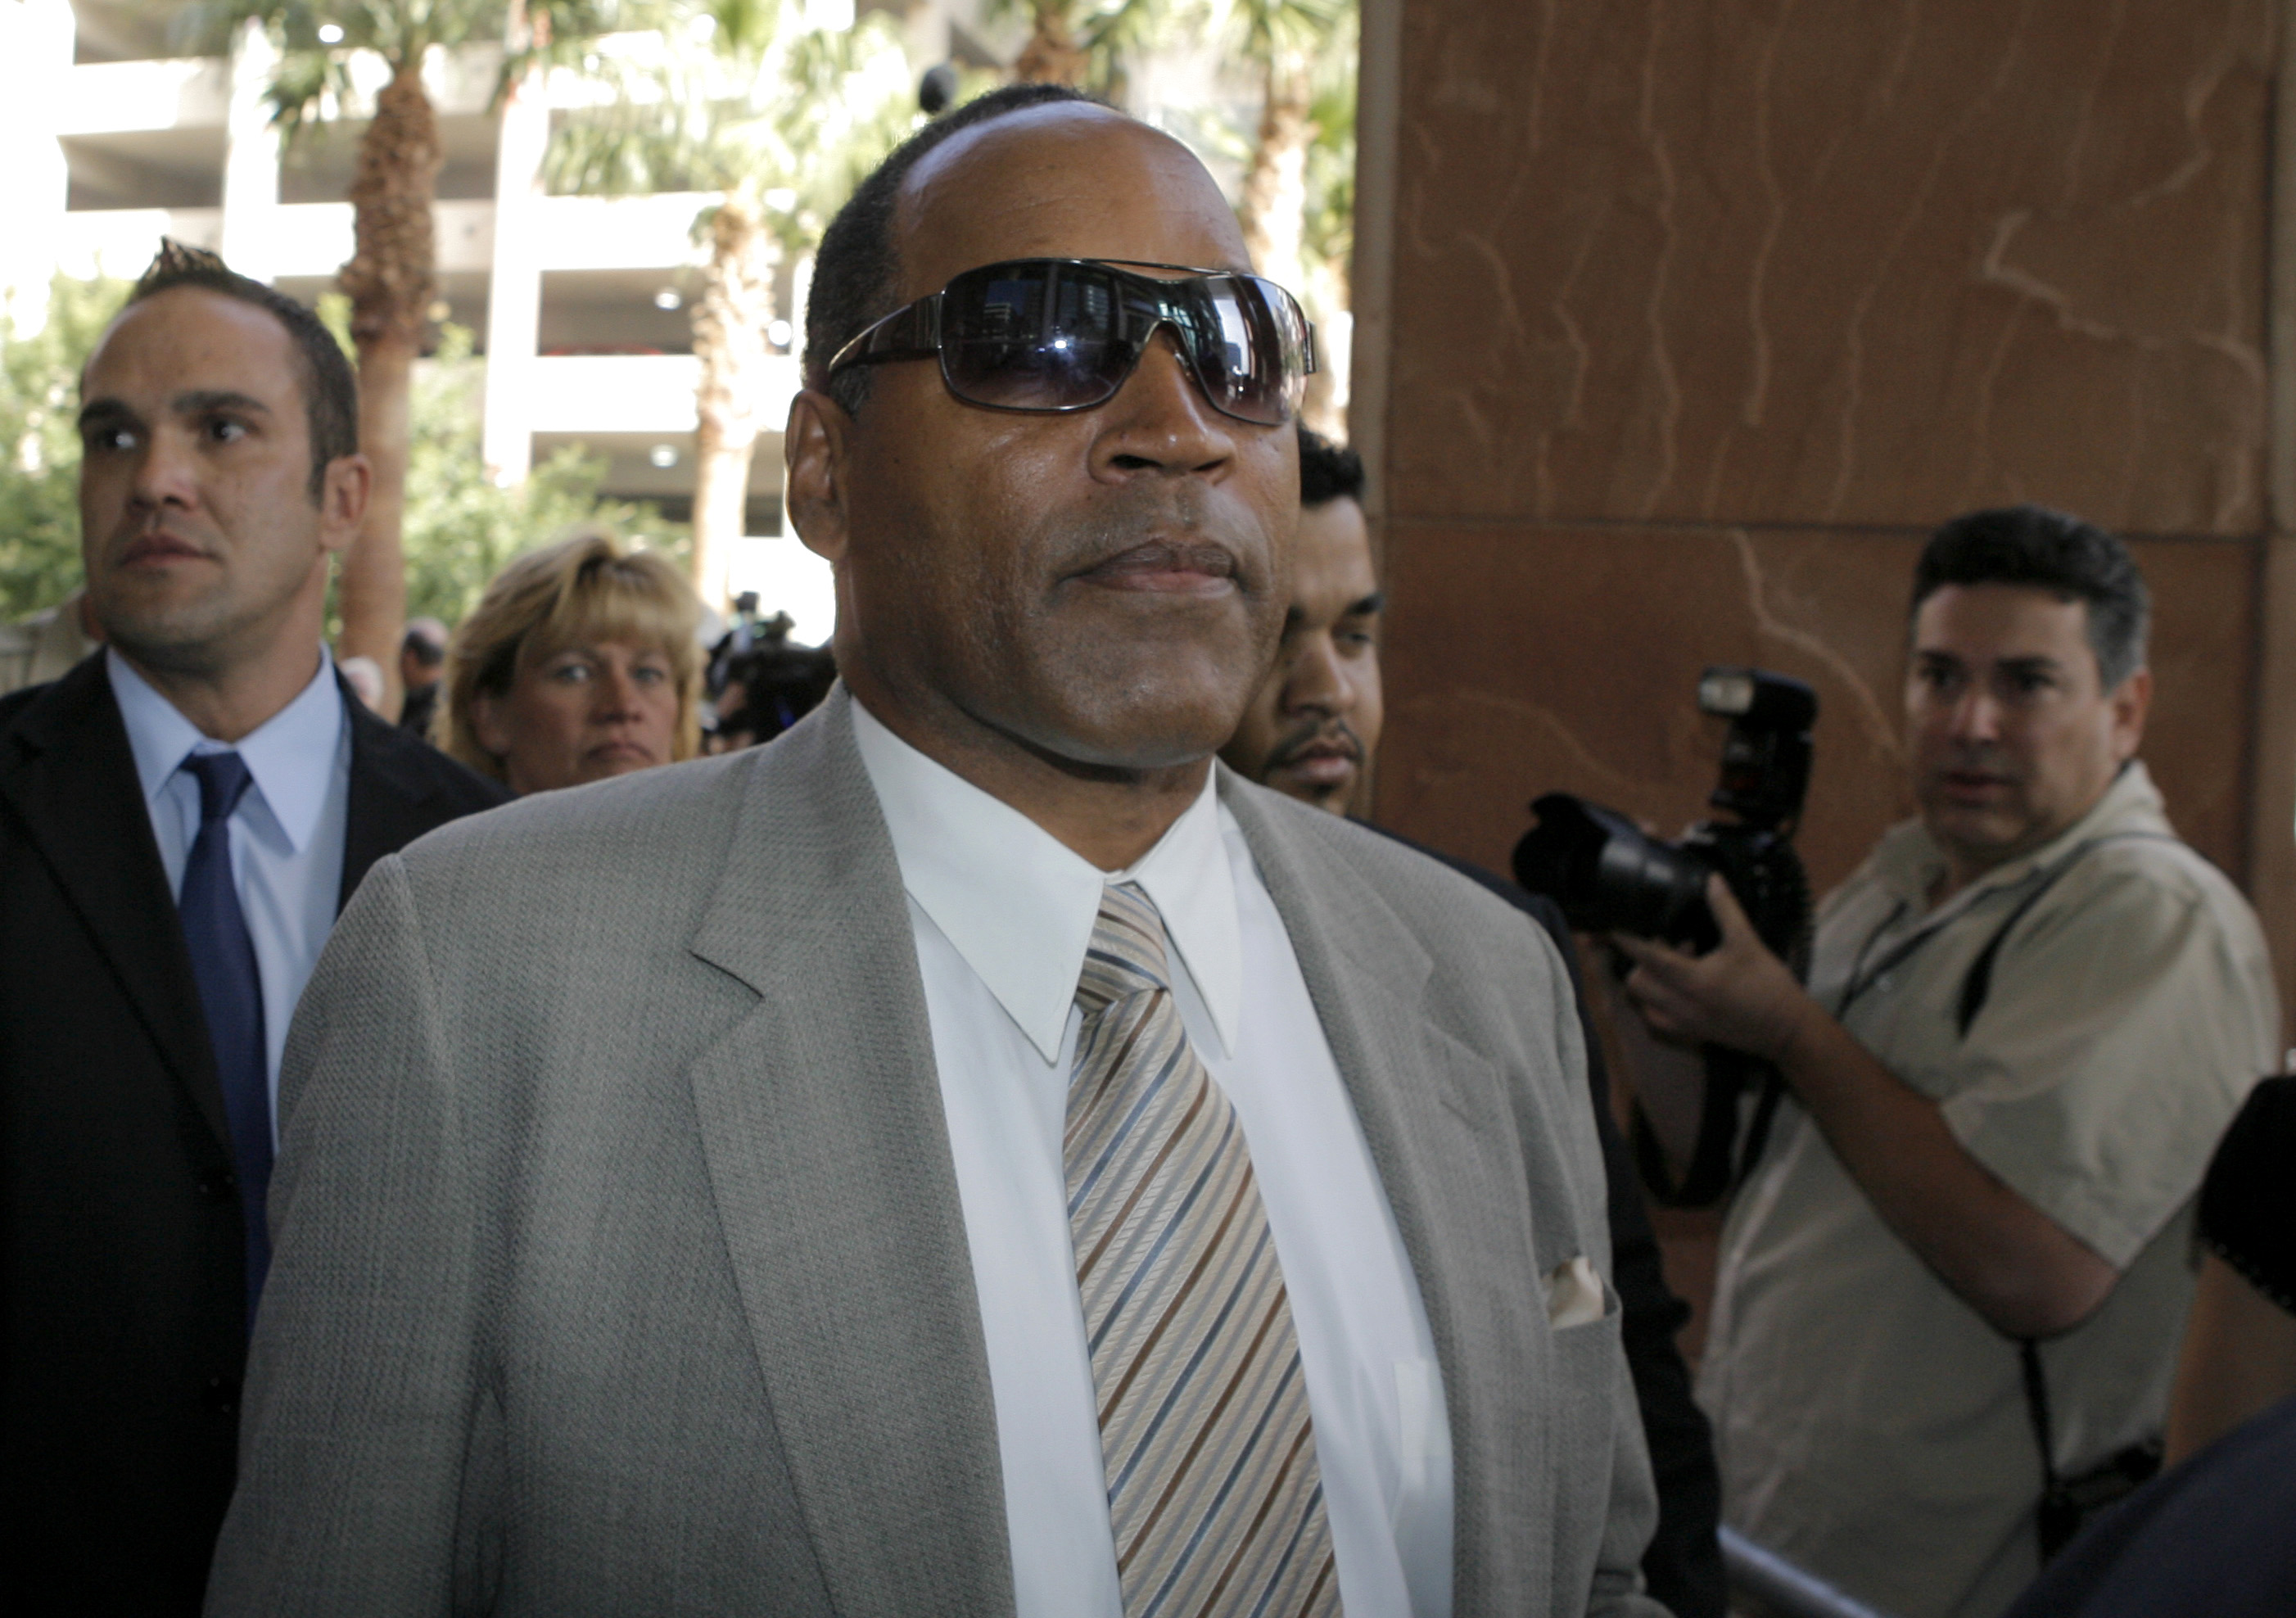 O.J. Simpson arrives at the courthouse for his preliminary hearing at the Clark County Regional Justice Center in Las Vegas